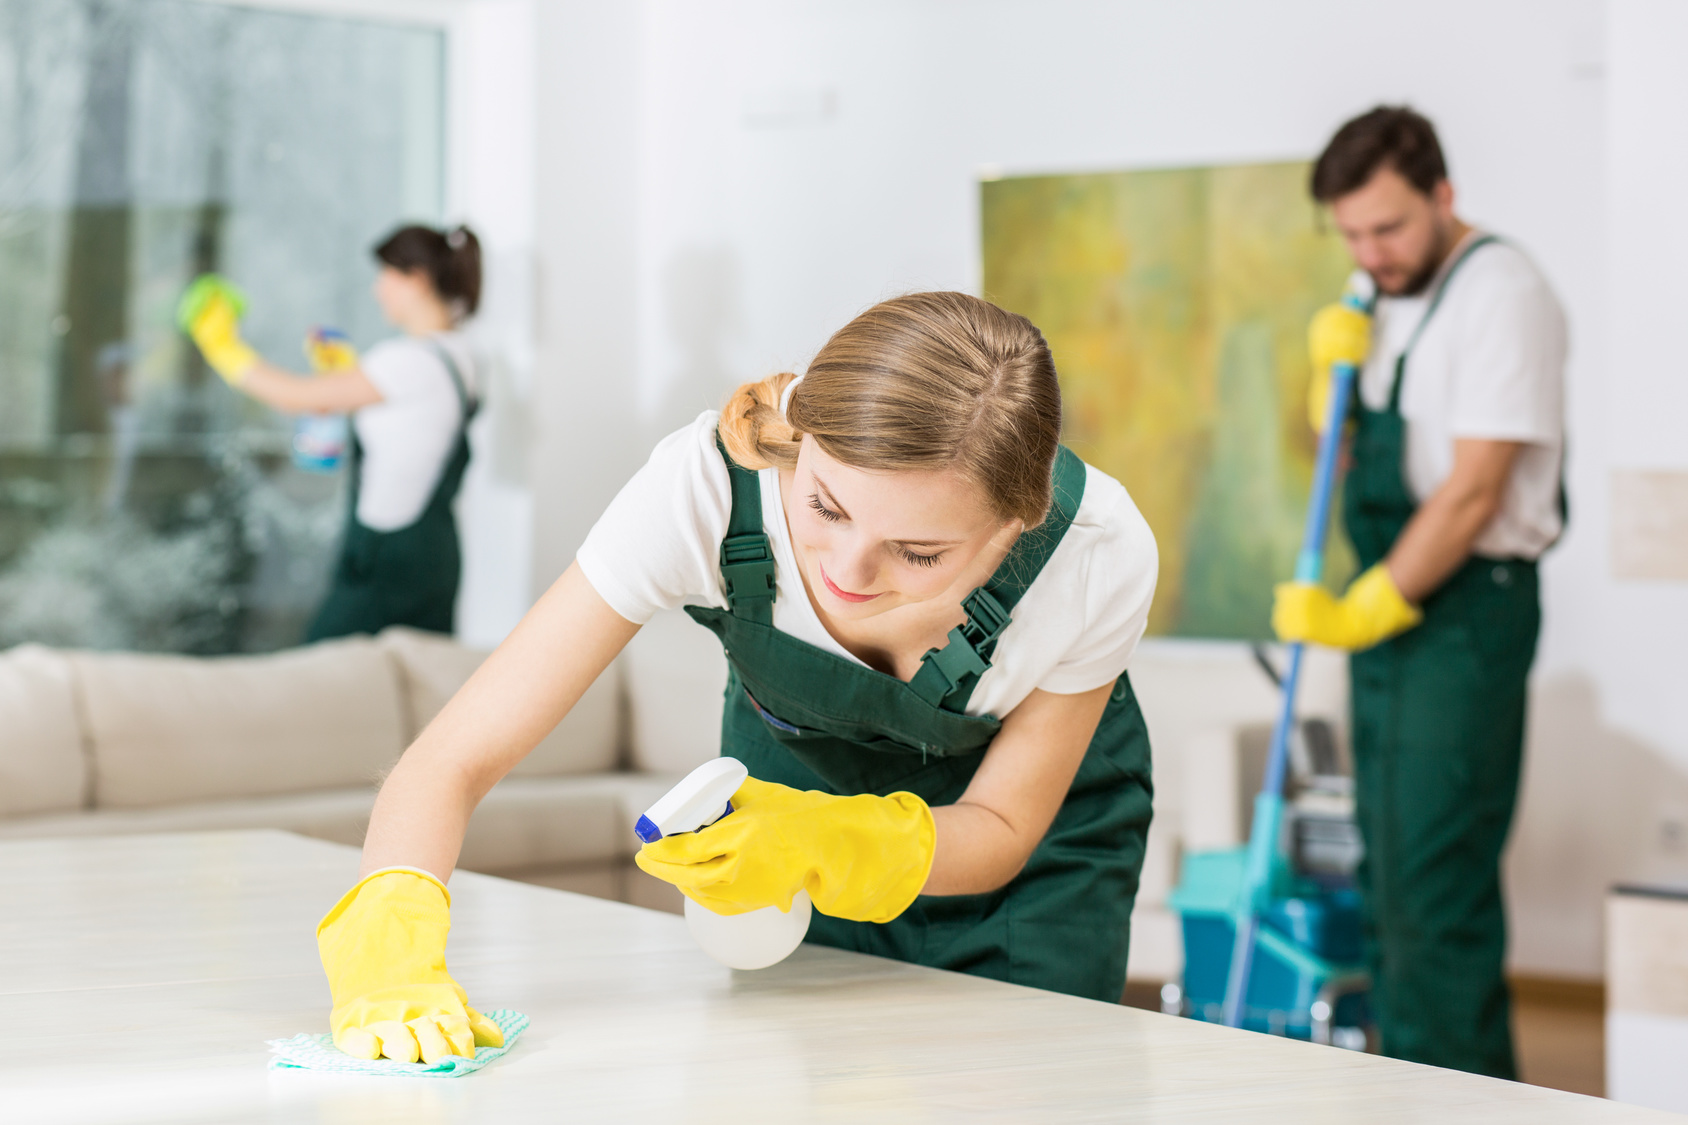 professional-cleaning-service.jpg